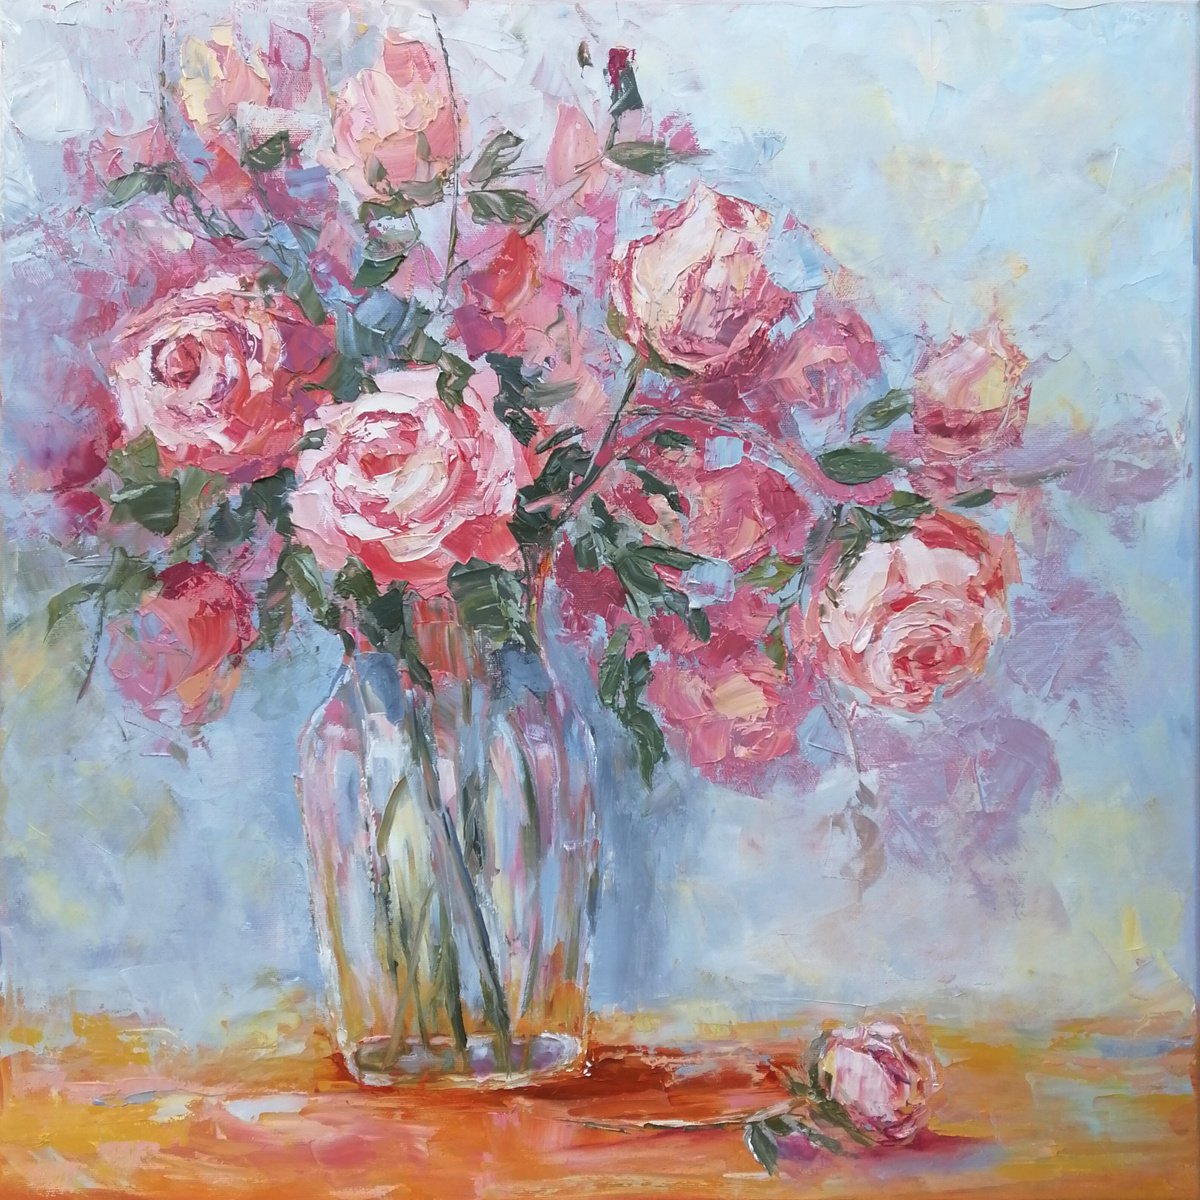 ROSES IN A JAR, 60x60cm, blooming roses oil floral still life painting by Emilia Milcheva